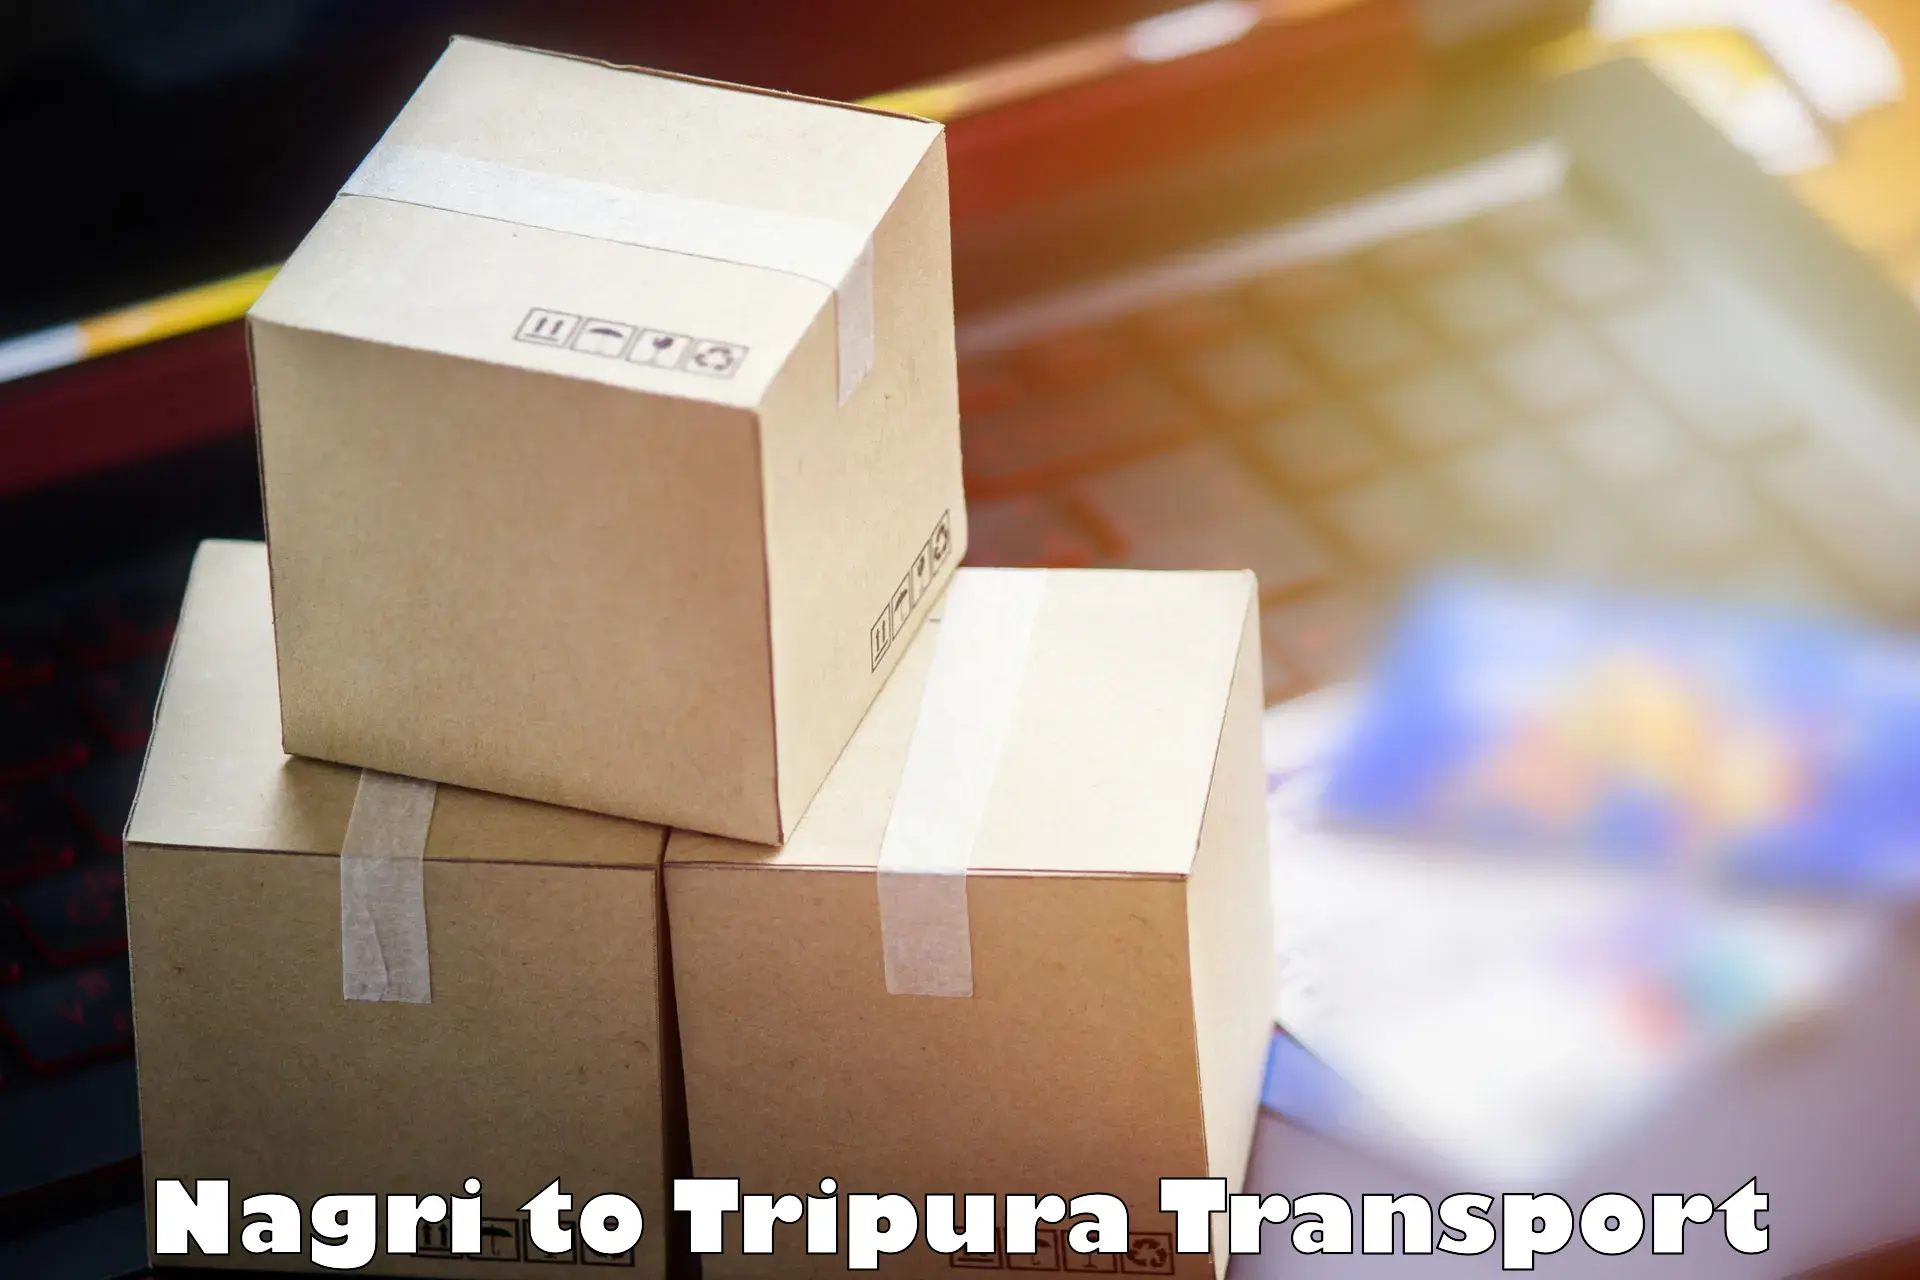 Container transport service Nagri to North Tripura